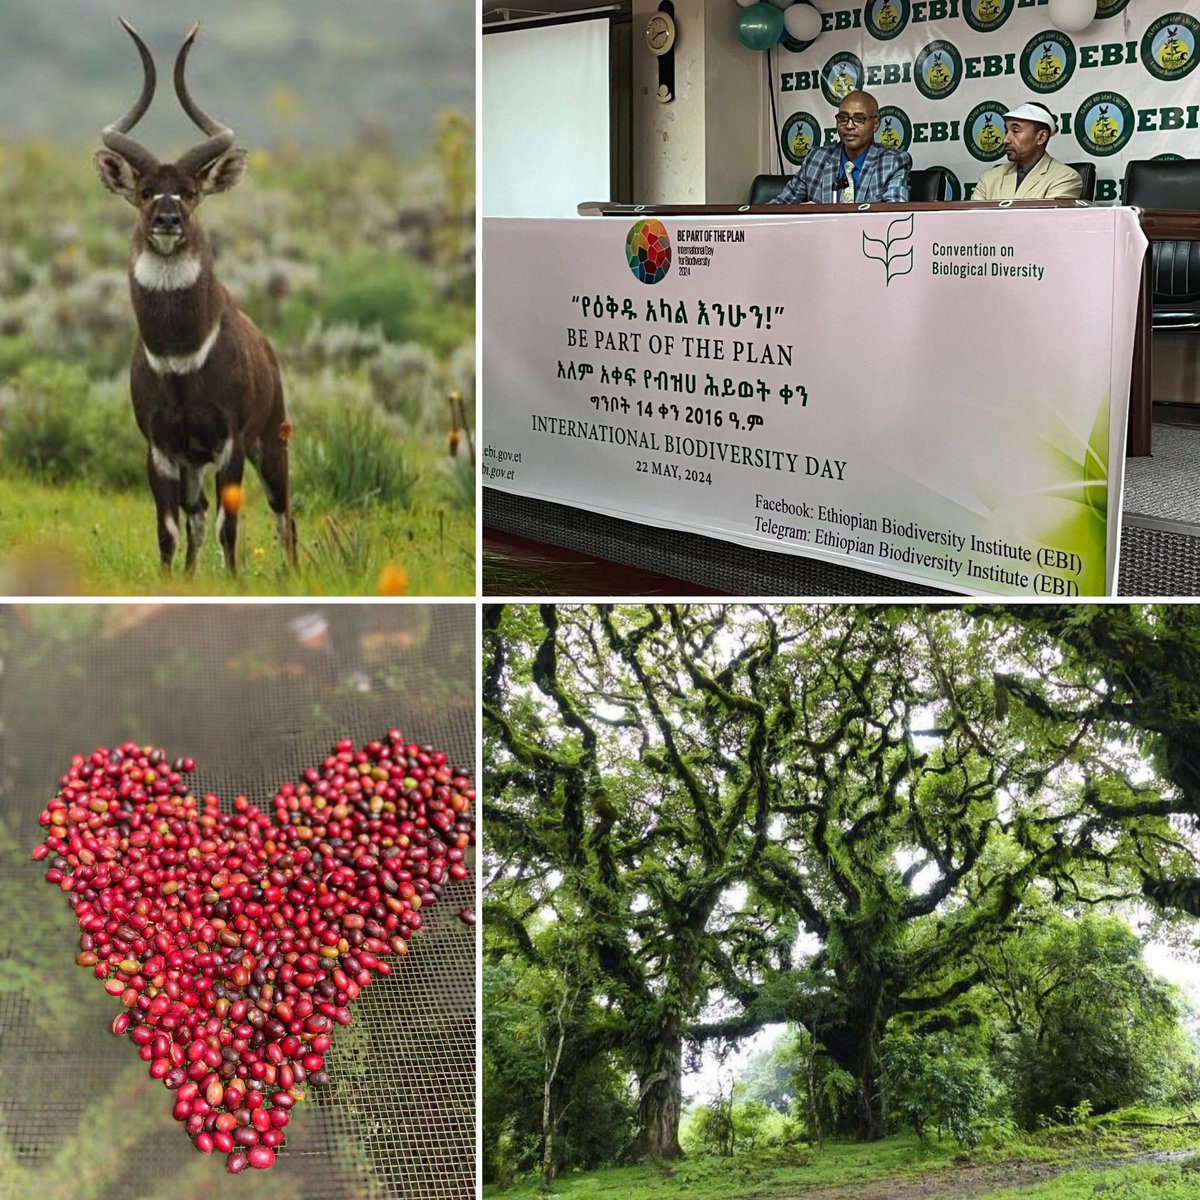 Happy International Biodiversity Day! Ethiopia is host to two global biodiversity hotspots and 🇳🇴through @Climateforest supports the protection of both. Today we celebrated with @EbiInstitute who encouraged partners to «be part of the plan to protect nature in Ethiopia»